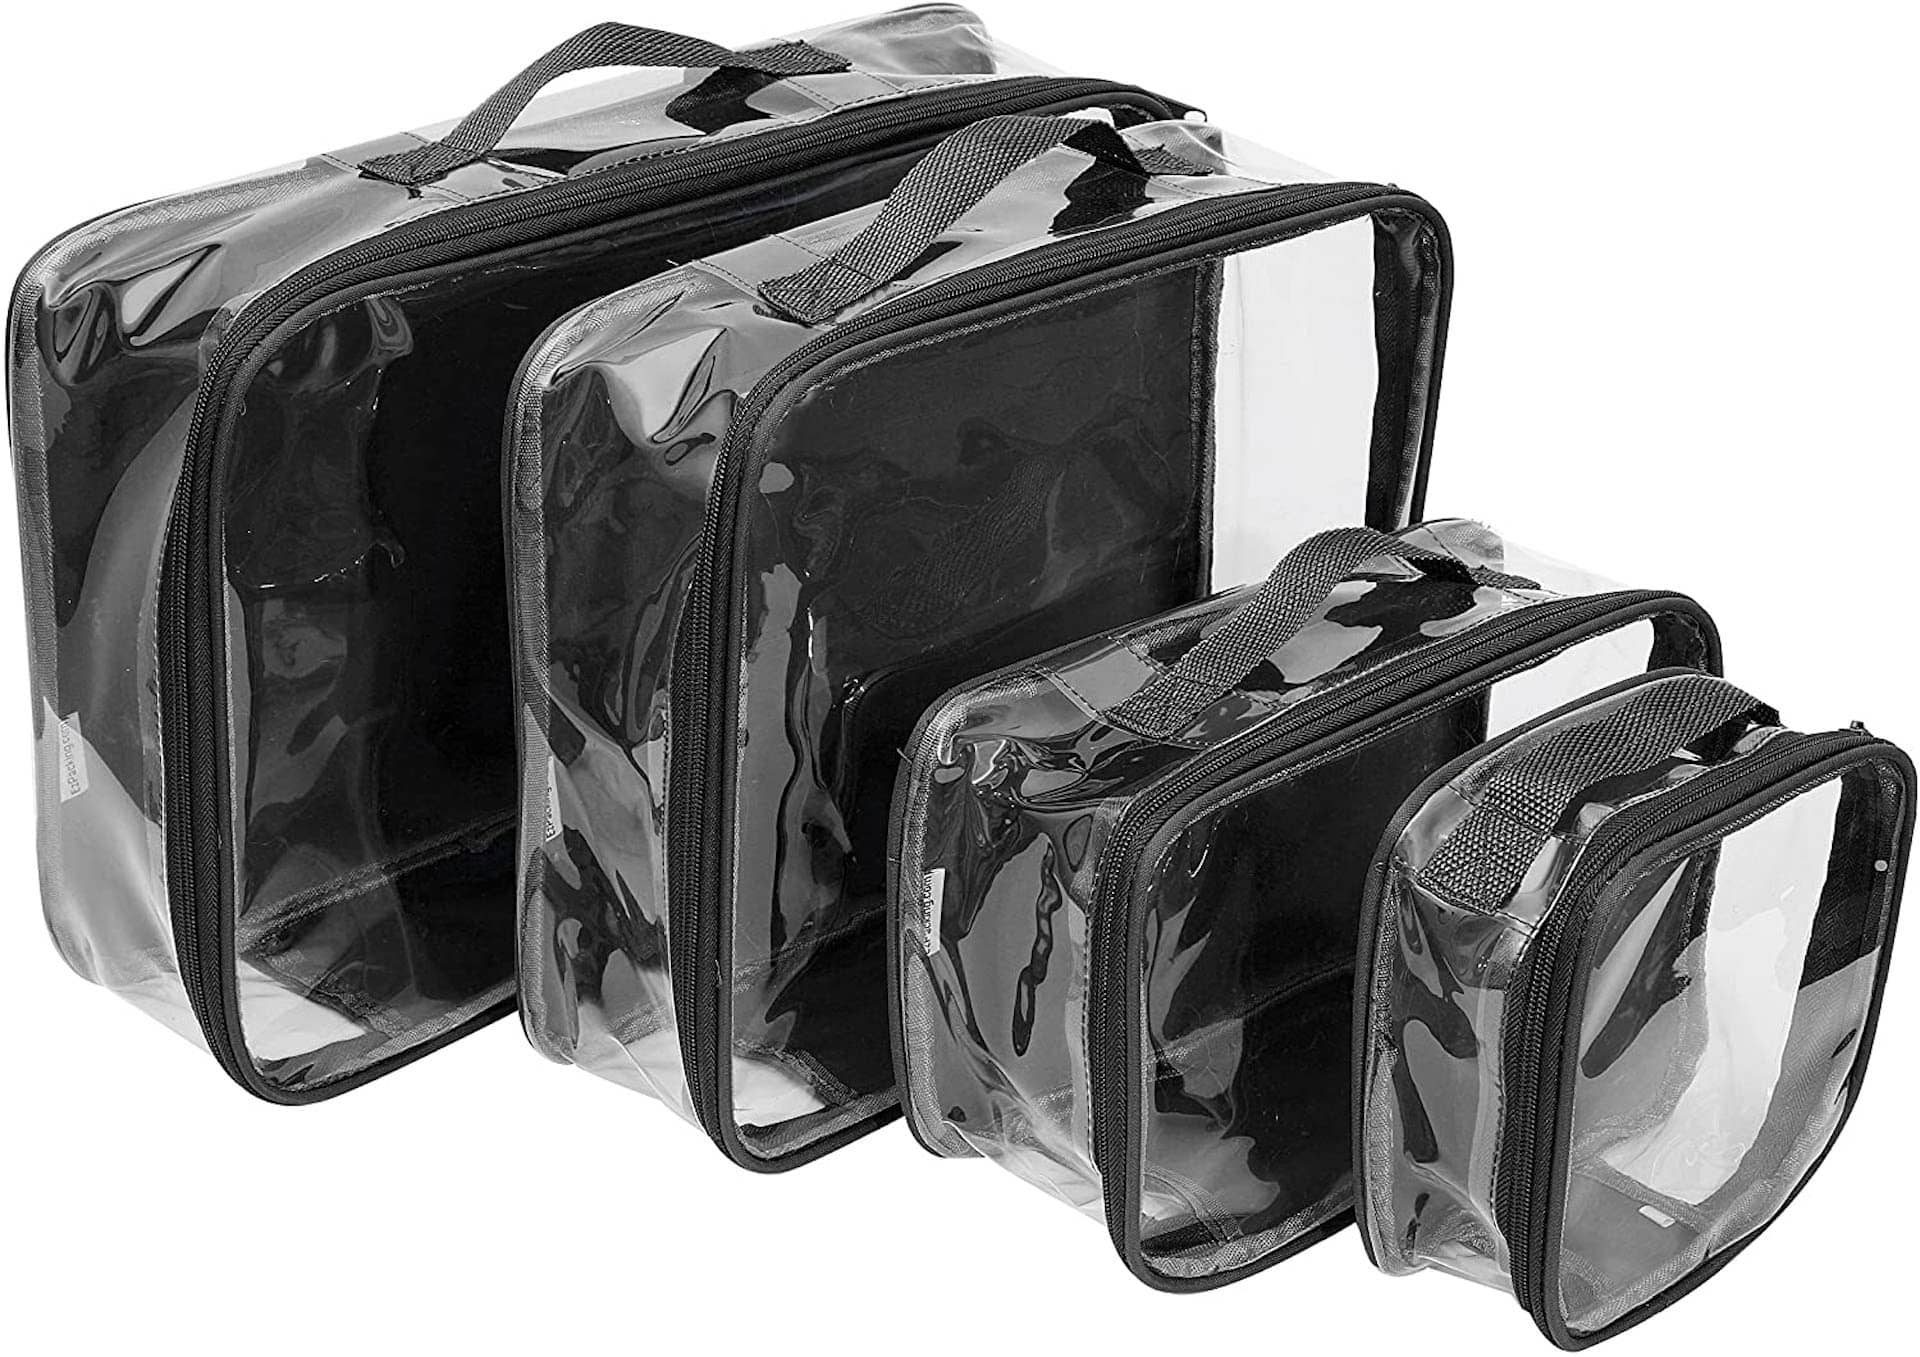 Best Packing Cubes for Travel and Amazon - Clear